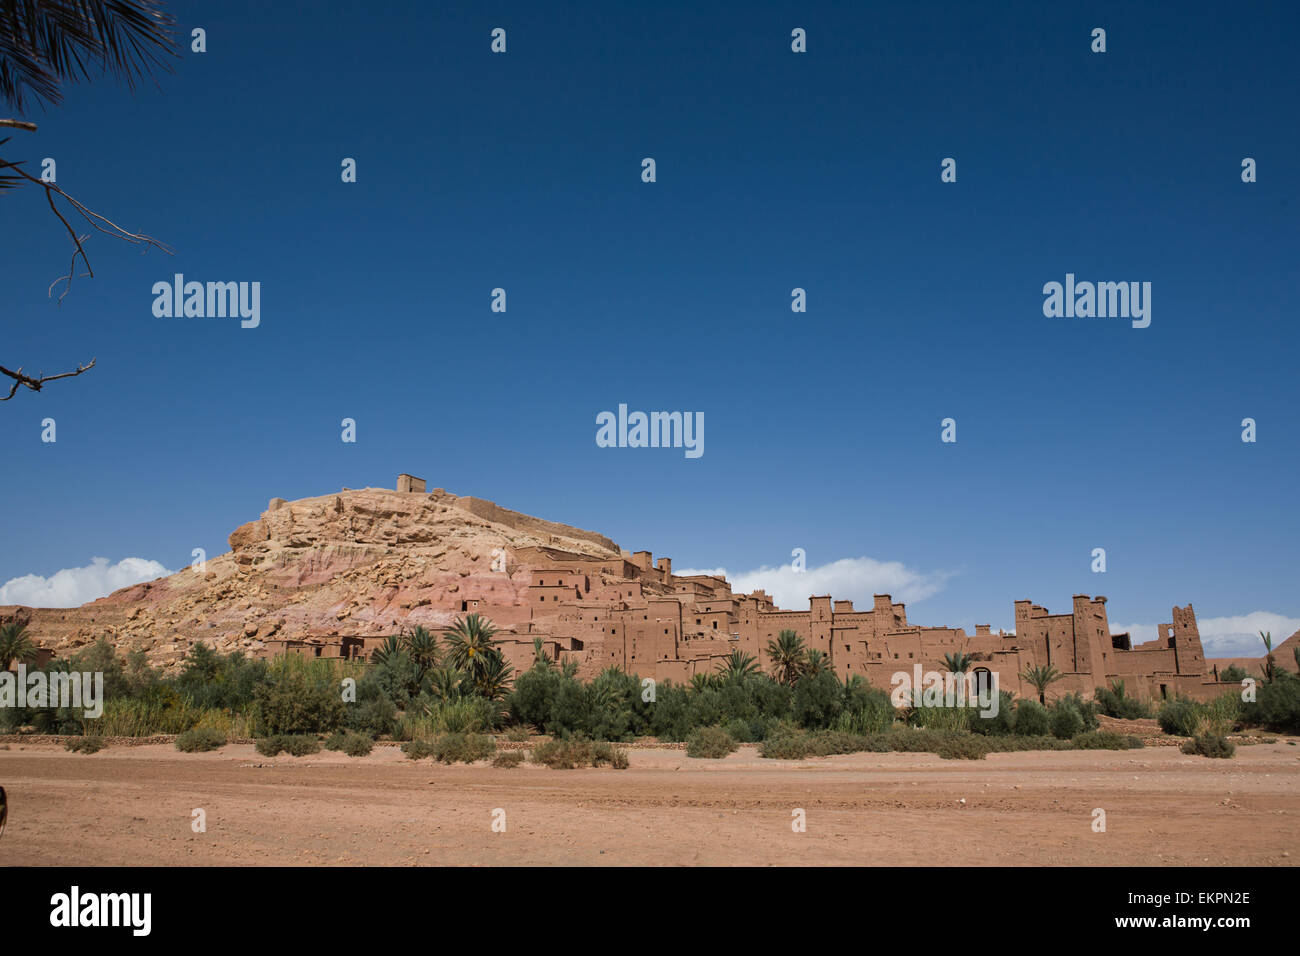 Ait Benhaddou - fortified city on the route between the Sahara Desert and Marrakech in Morocco Africa Stock Photo